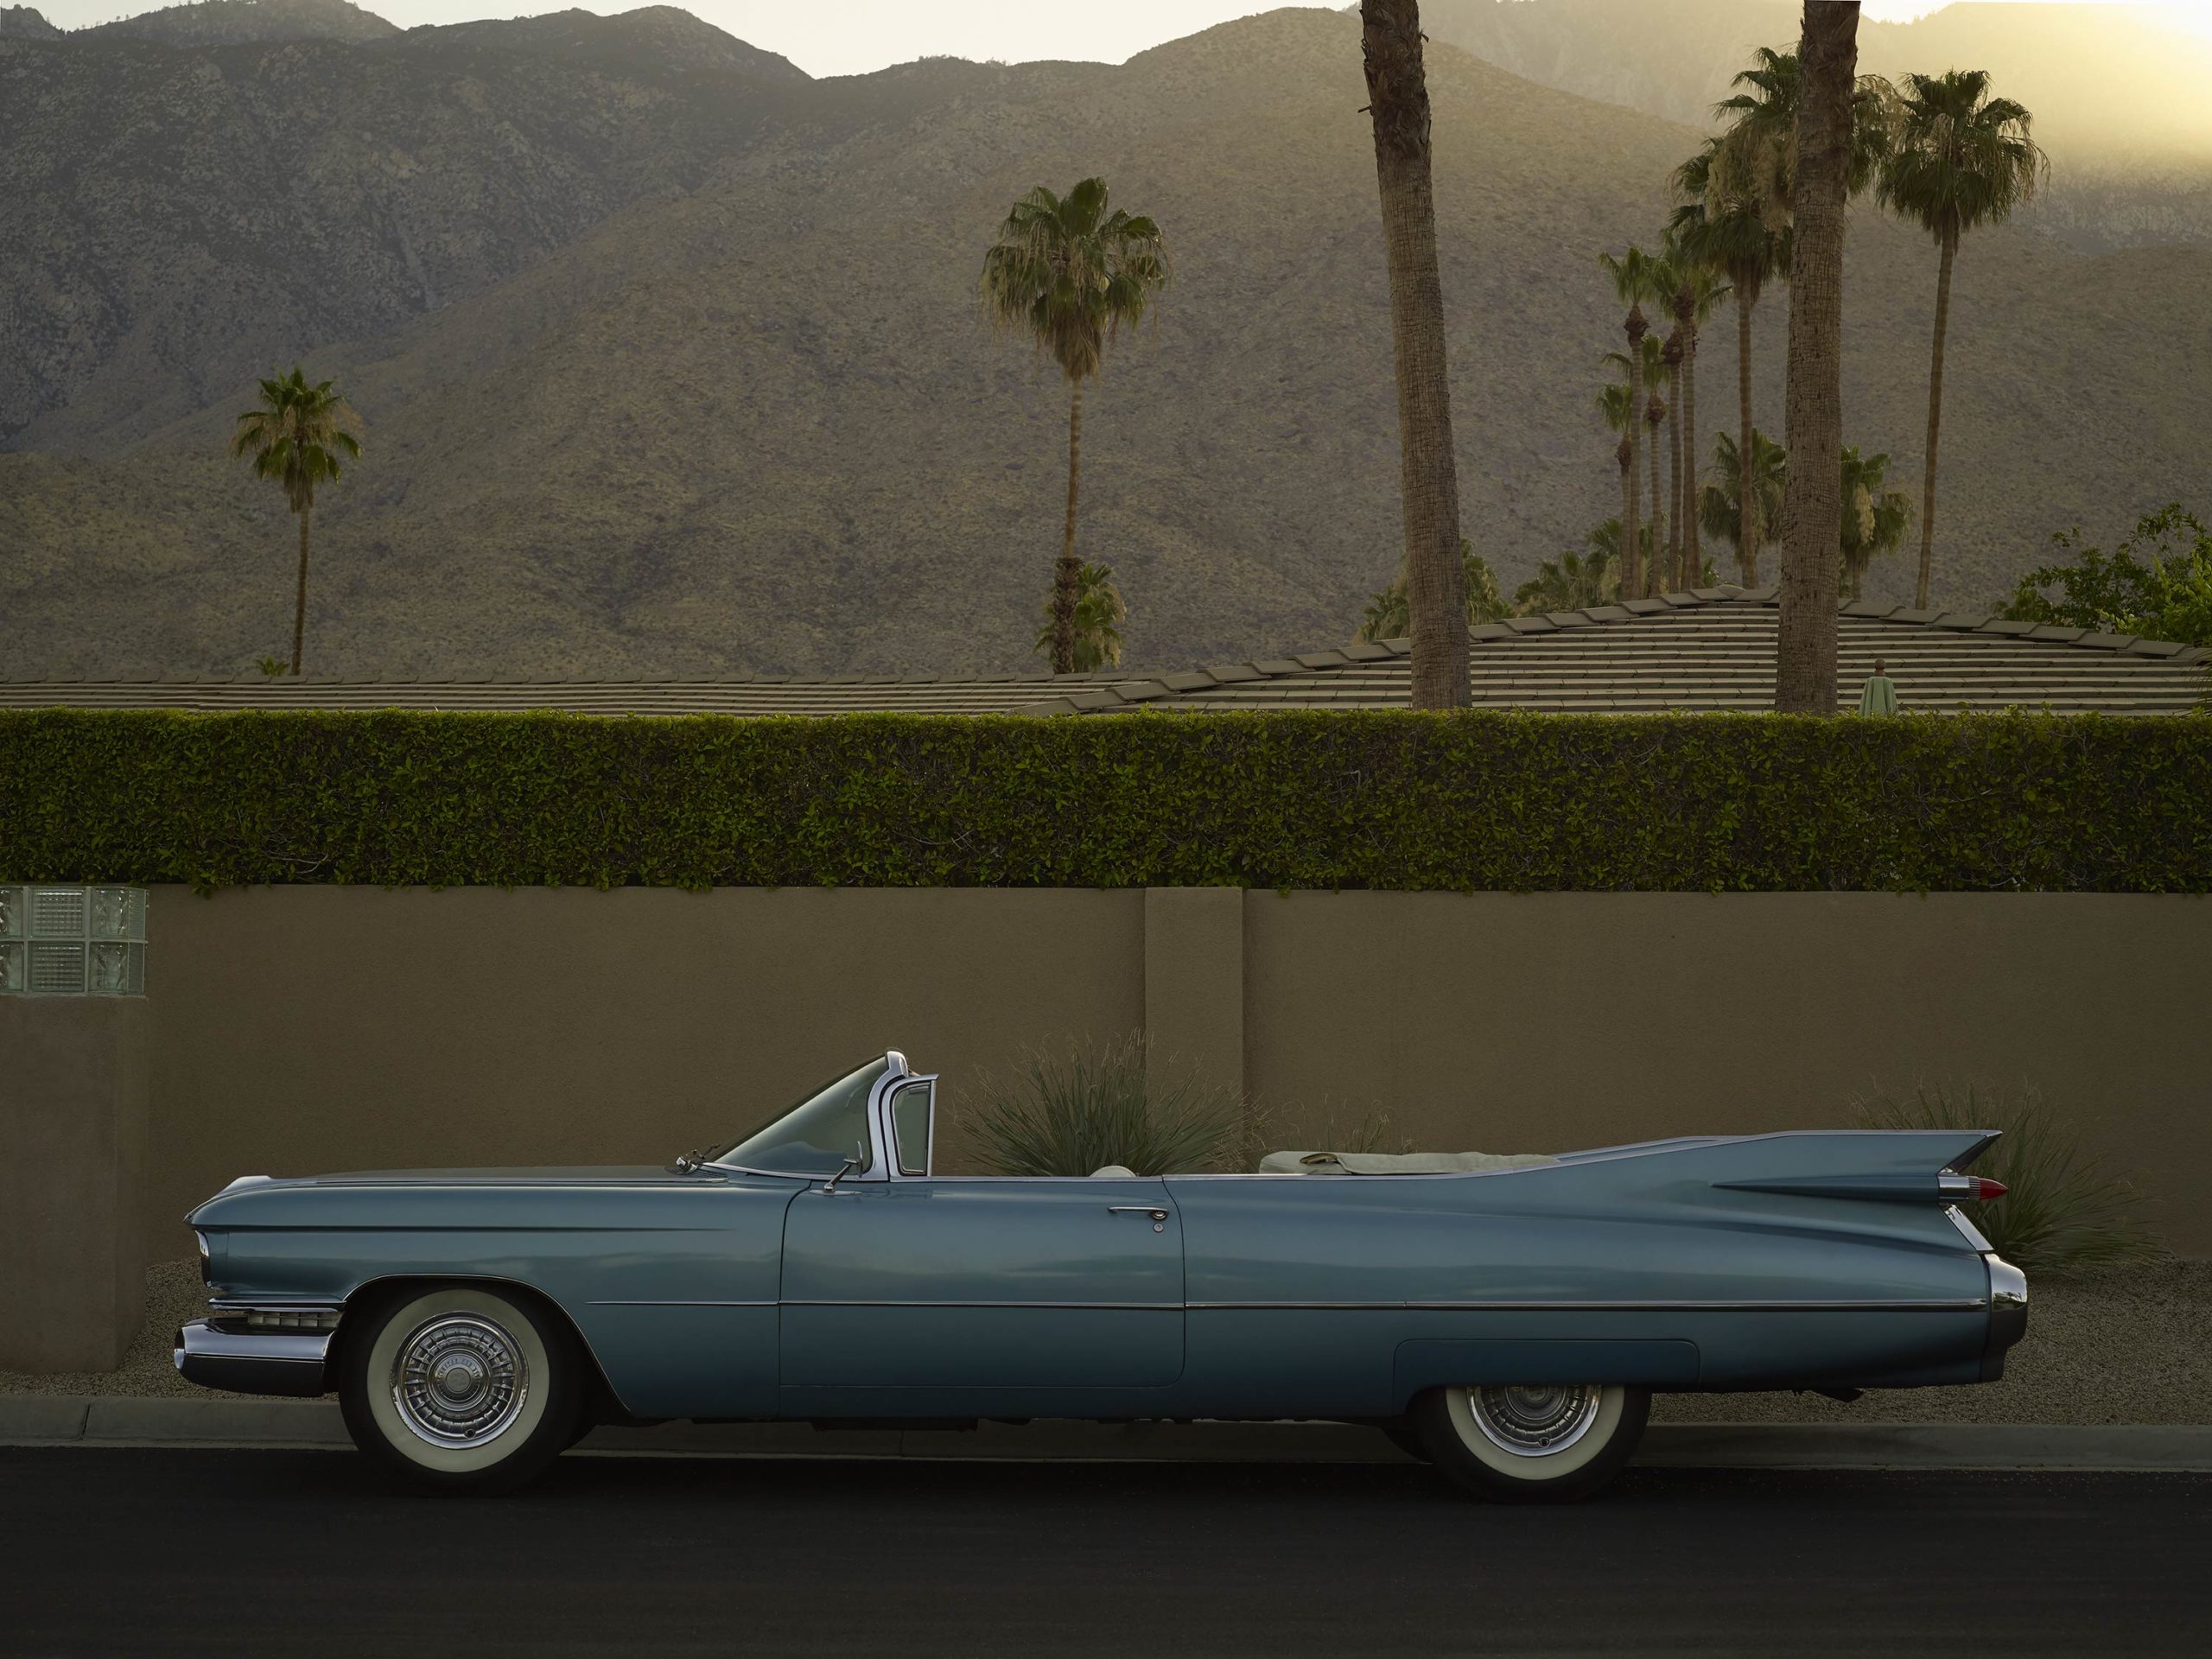 Sky Blue Cadillac - I Heart Palm Springs Collection - Fine Art Photography by Toby Dixon